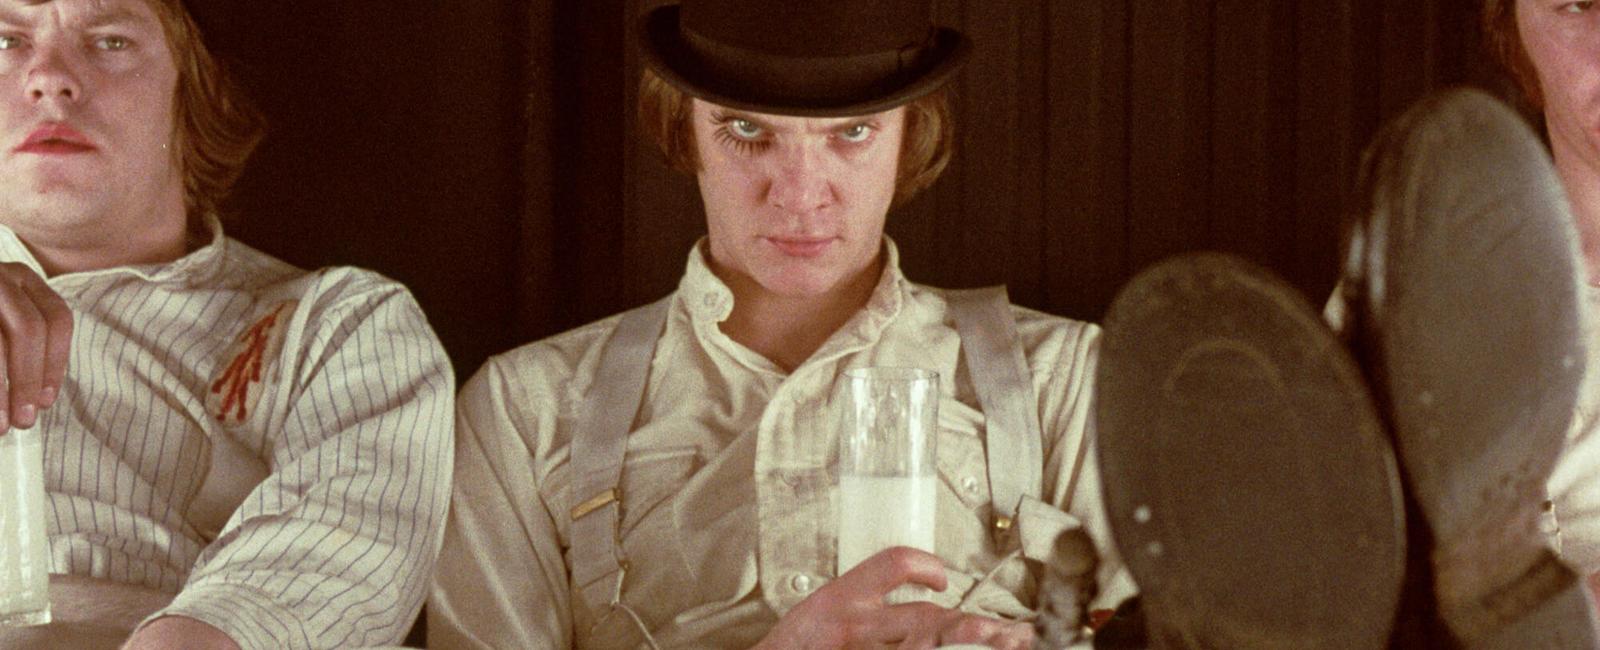 Malcolm mcdowell s eyes were anesthetized for the torture scenes in a clockwork orange so that he would film for periods of time without too much discomfort nevertheless his corneas got repeatedly scratched by the metal lid locks